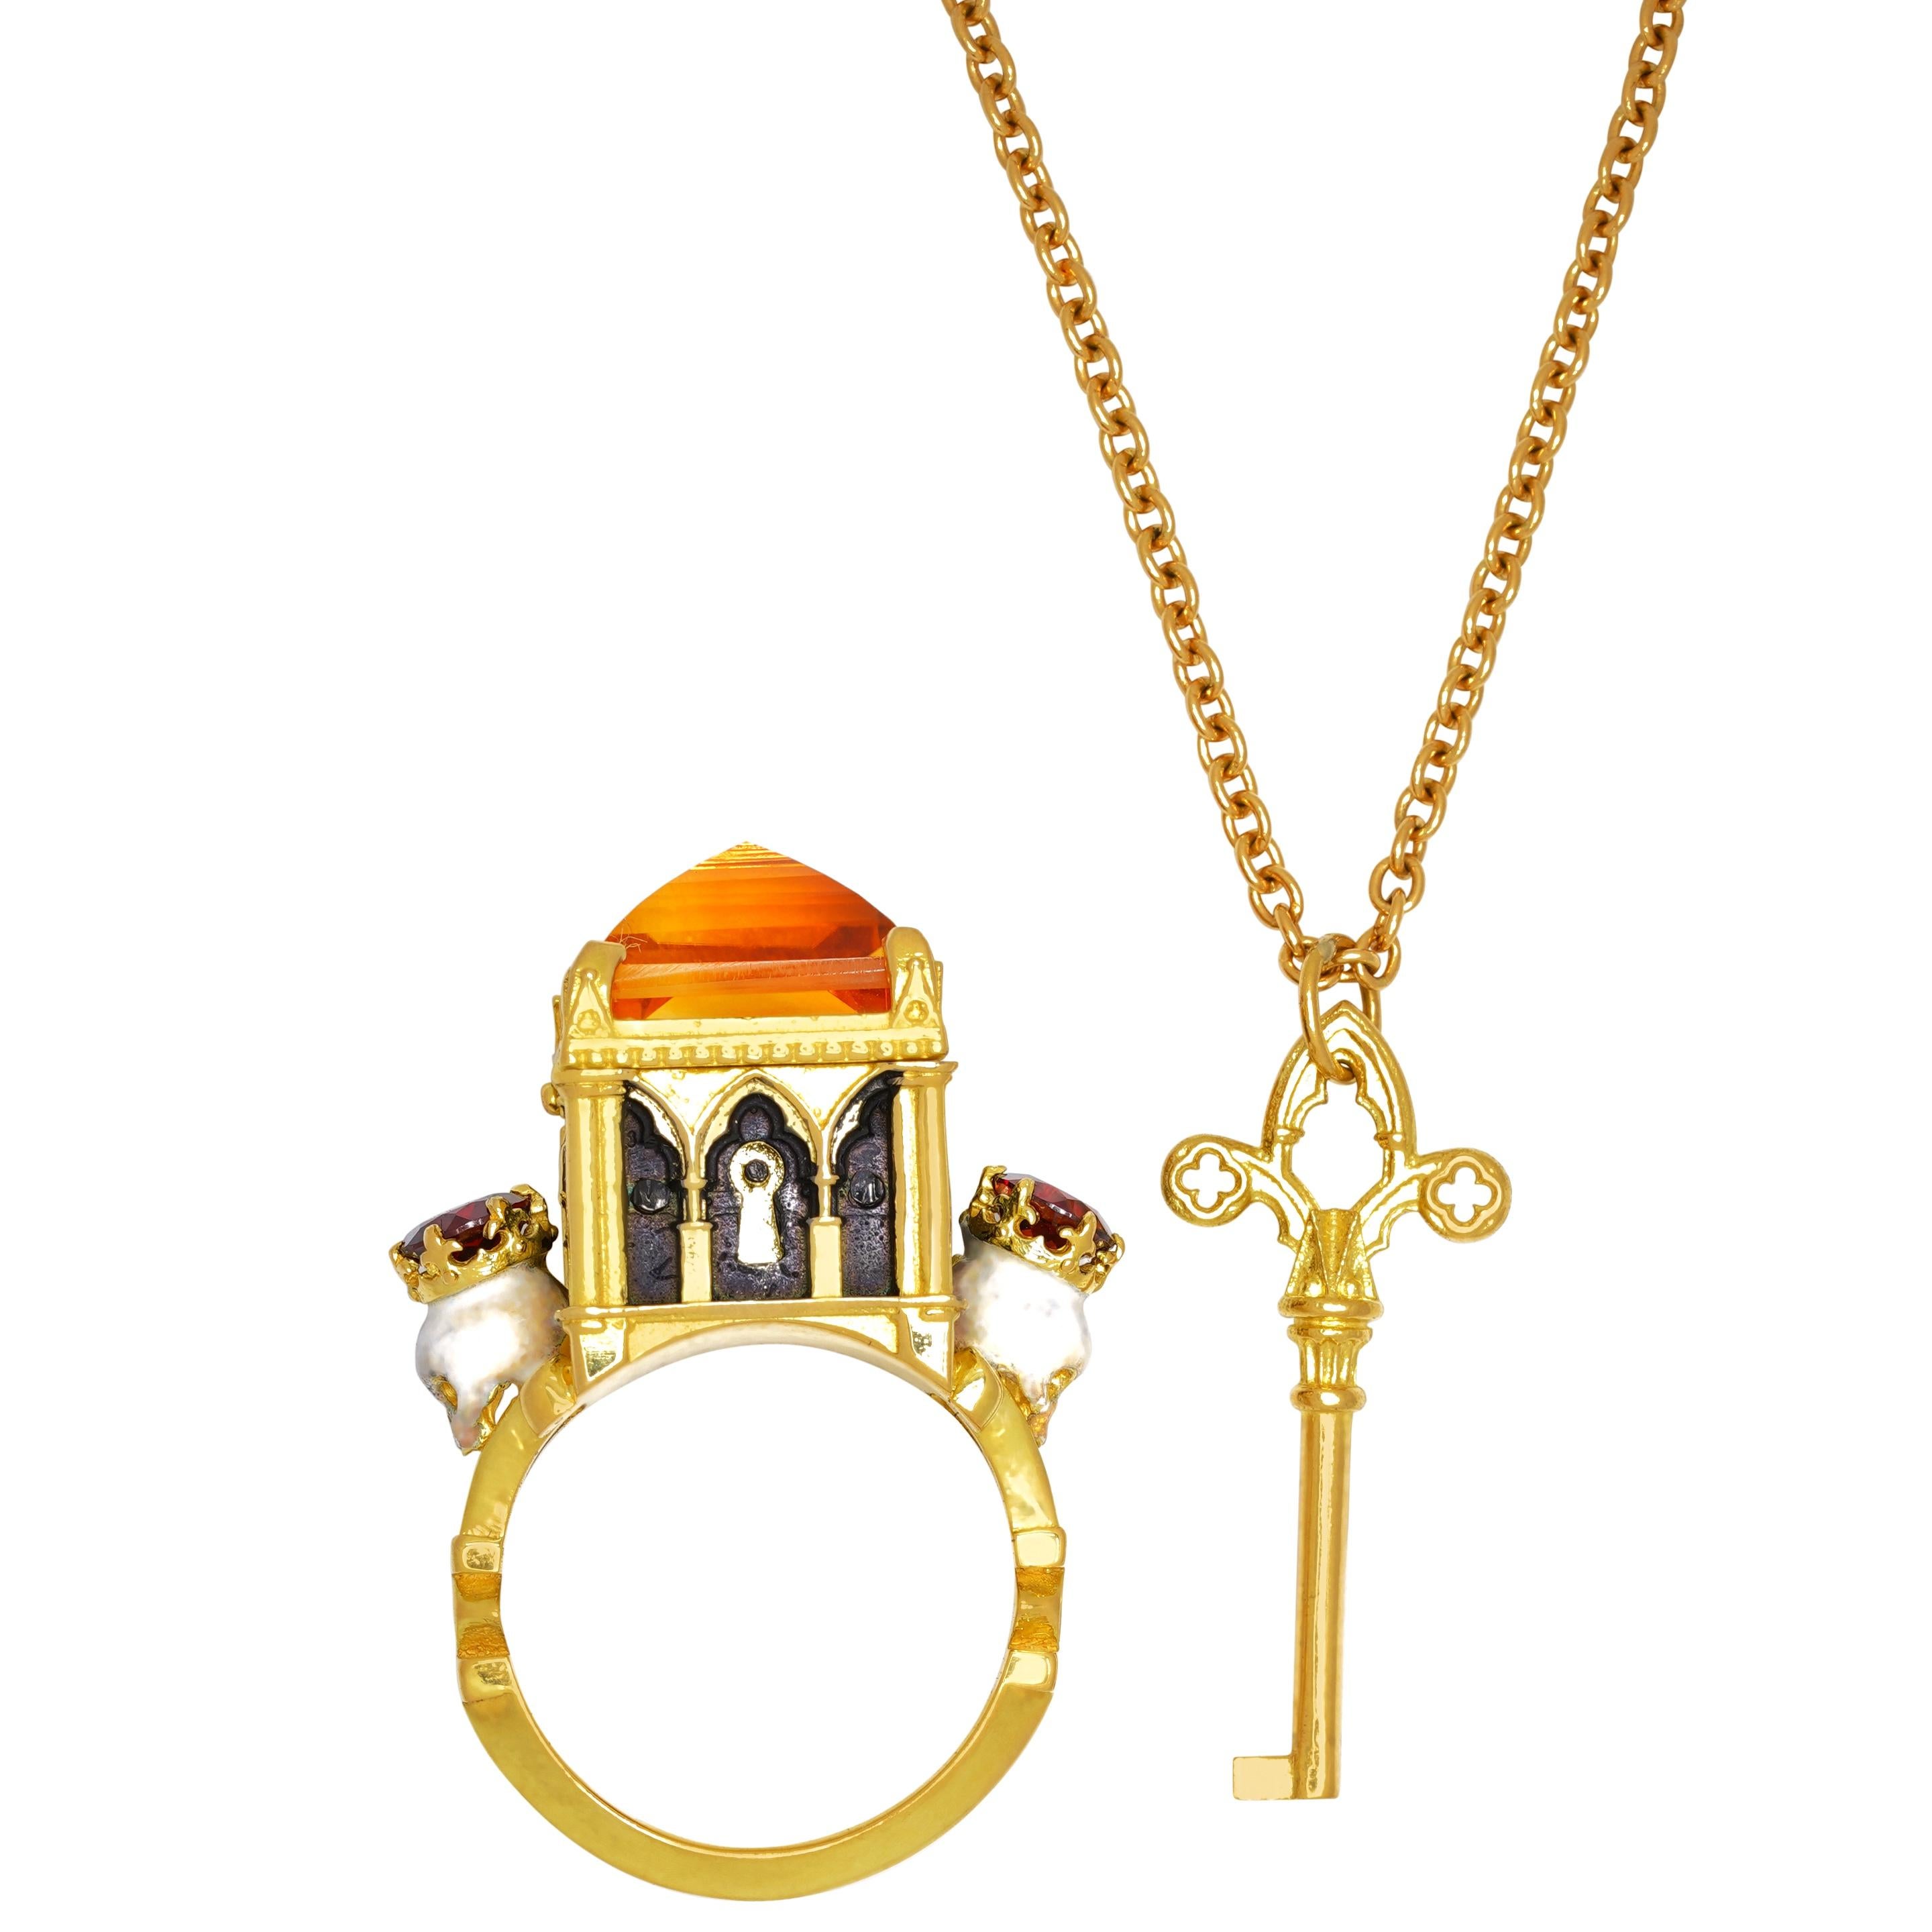 Baroque Catacomb Saints Poison Chamber Ring in 18 Karat Gold with Citrine and Garnets